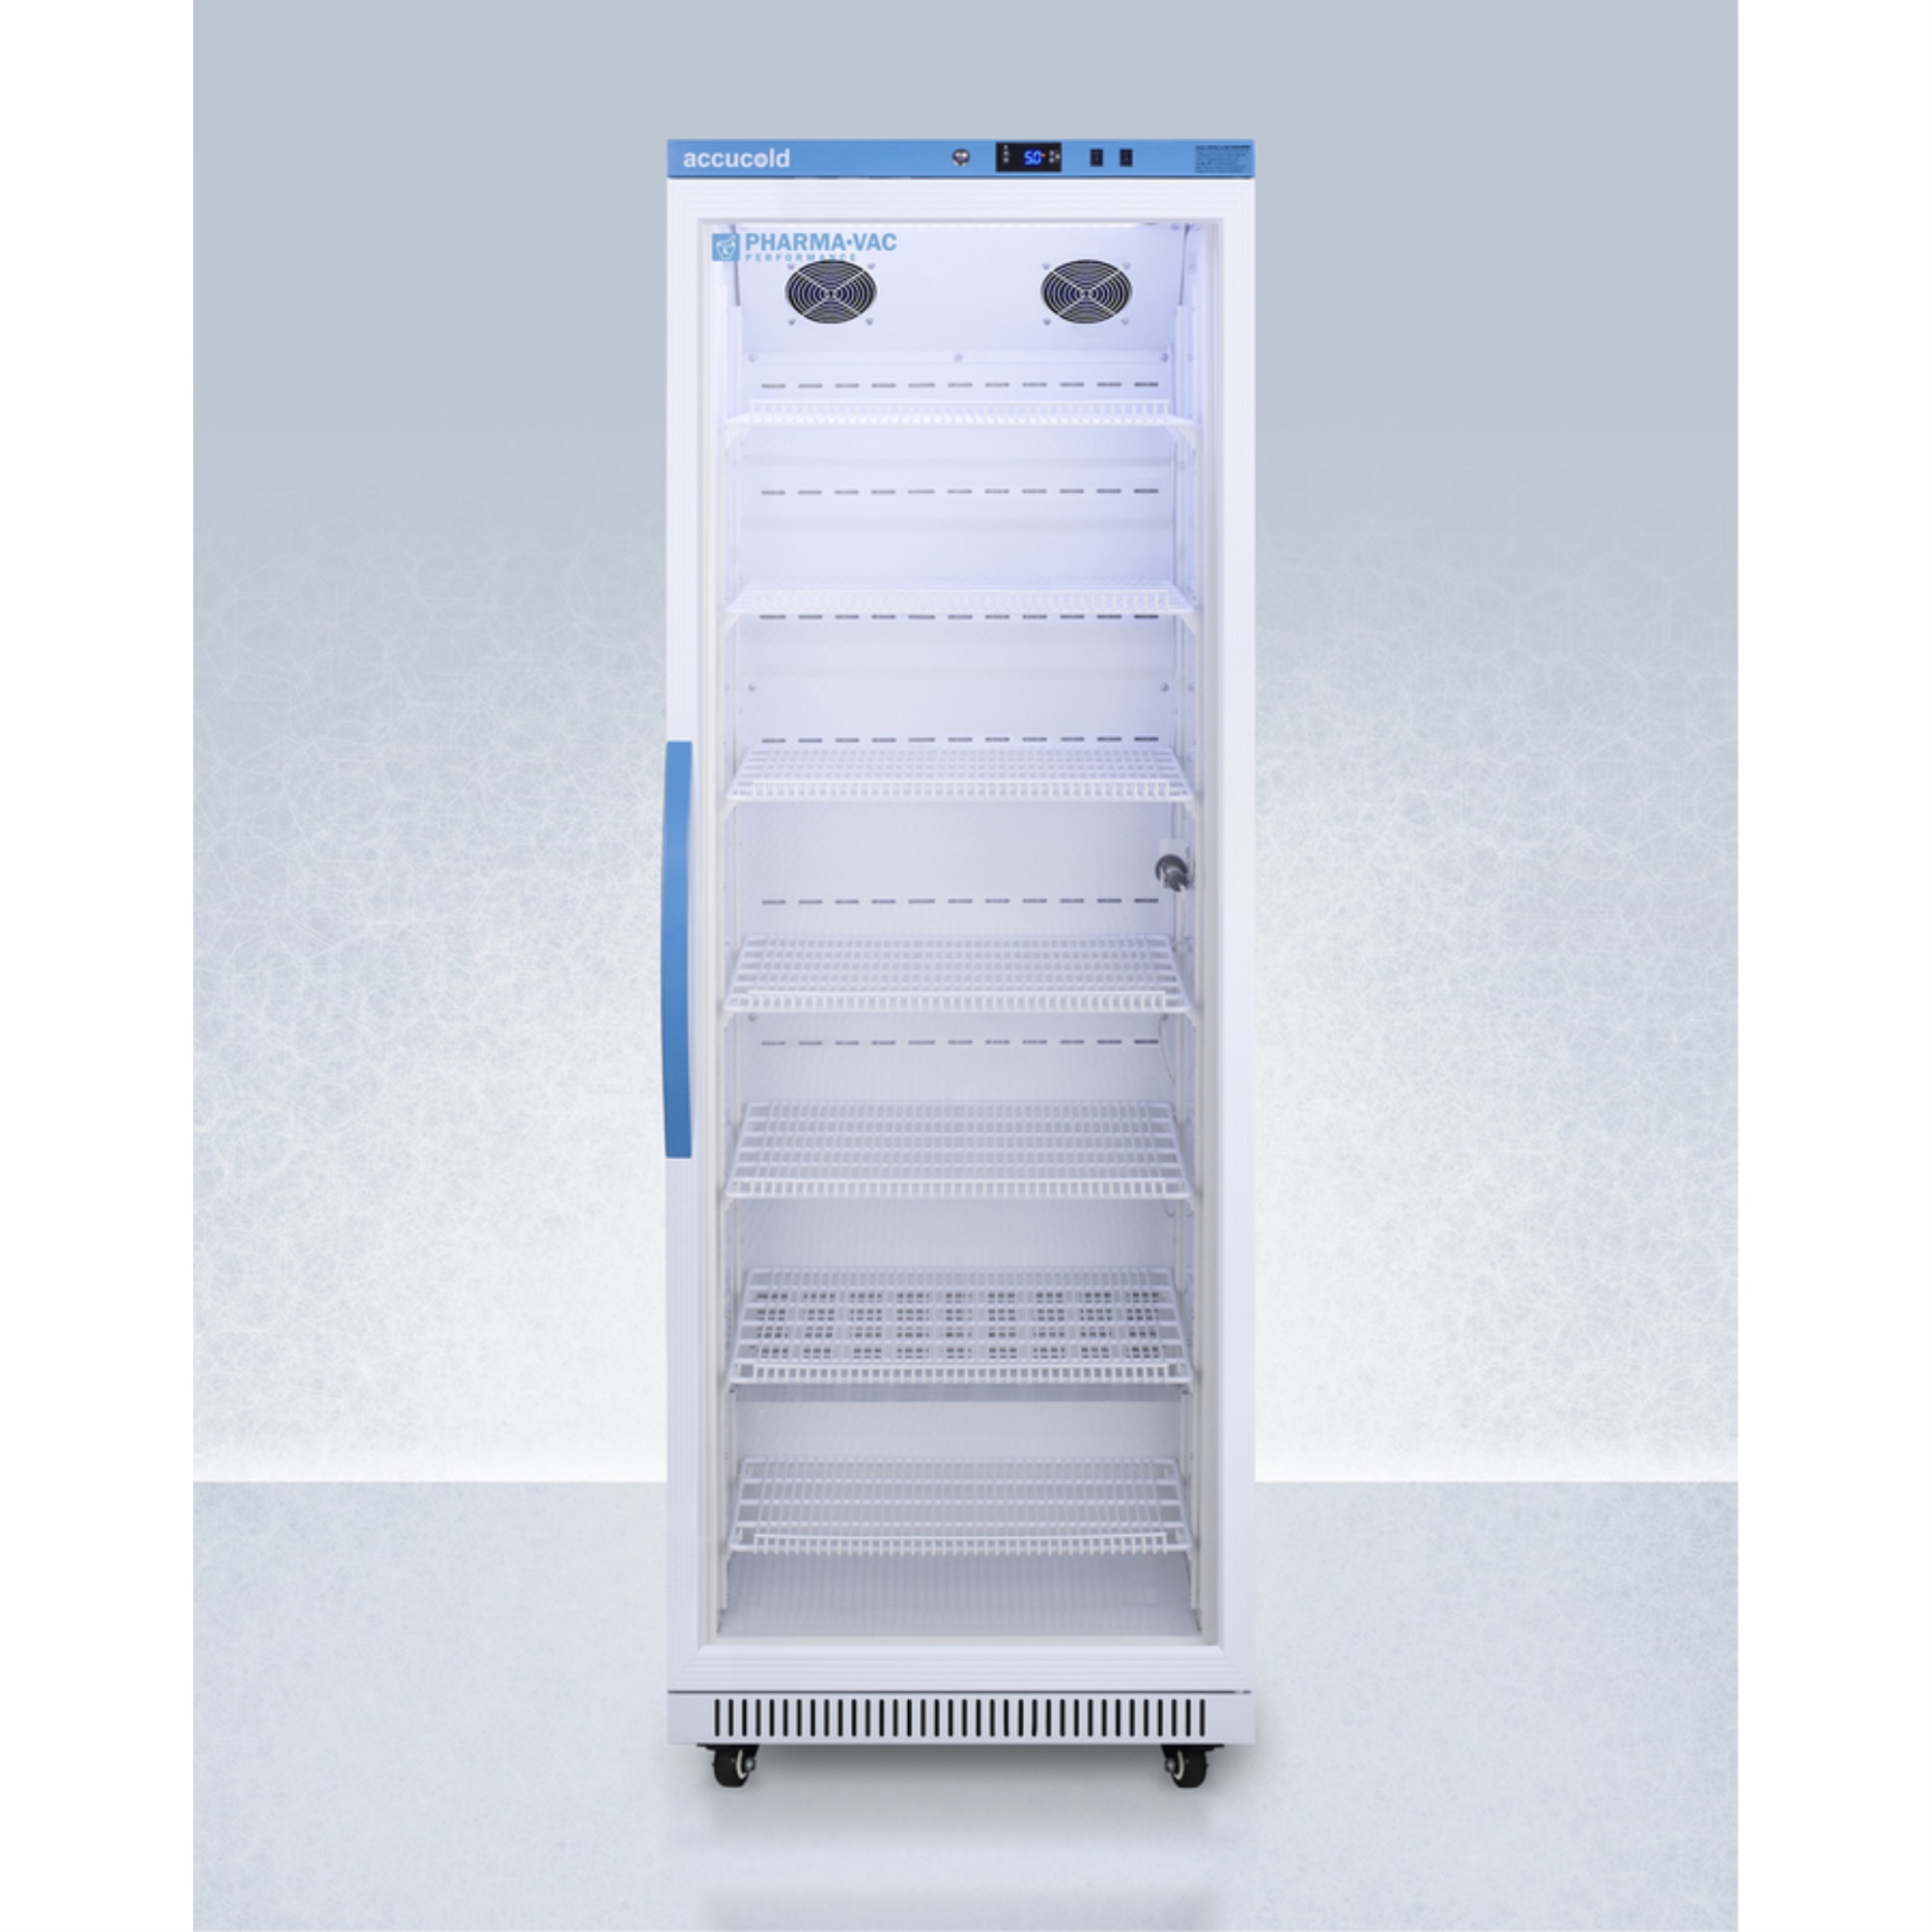 AccuCold Pharma-Vac Performance Series 18 cu.ft. all-refrigerator